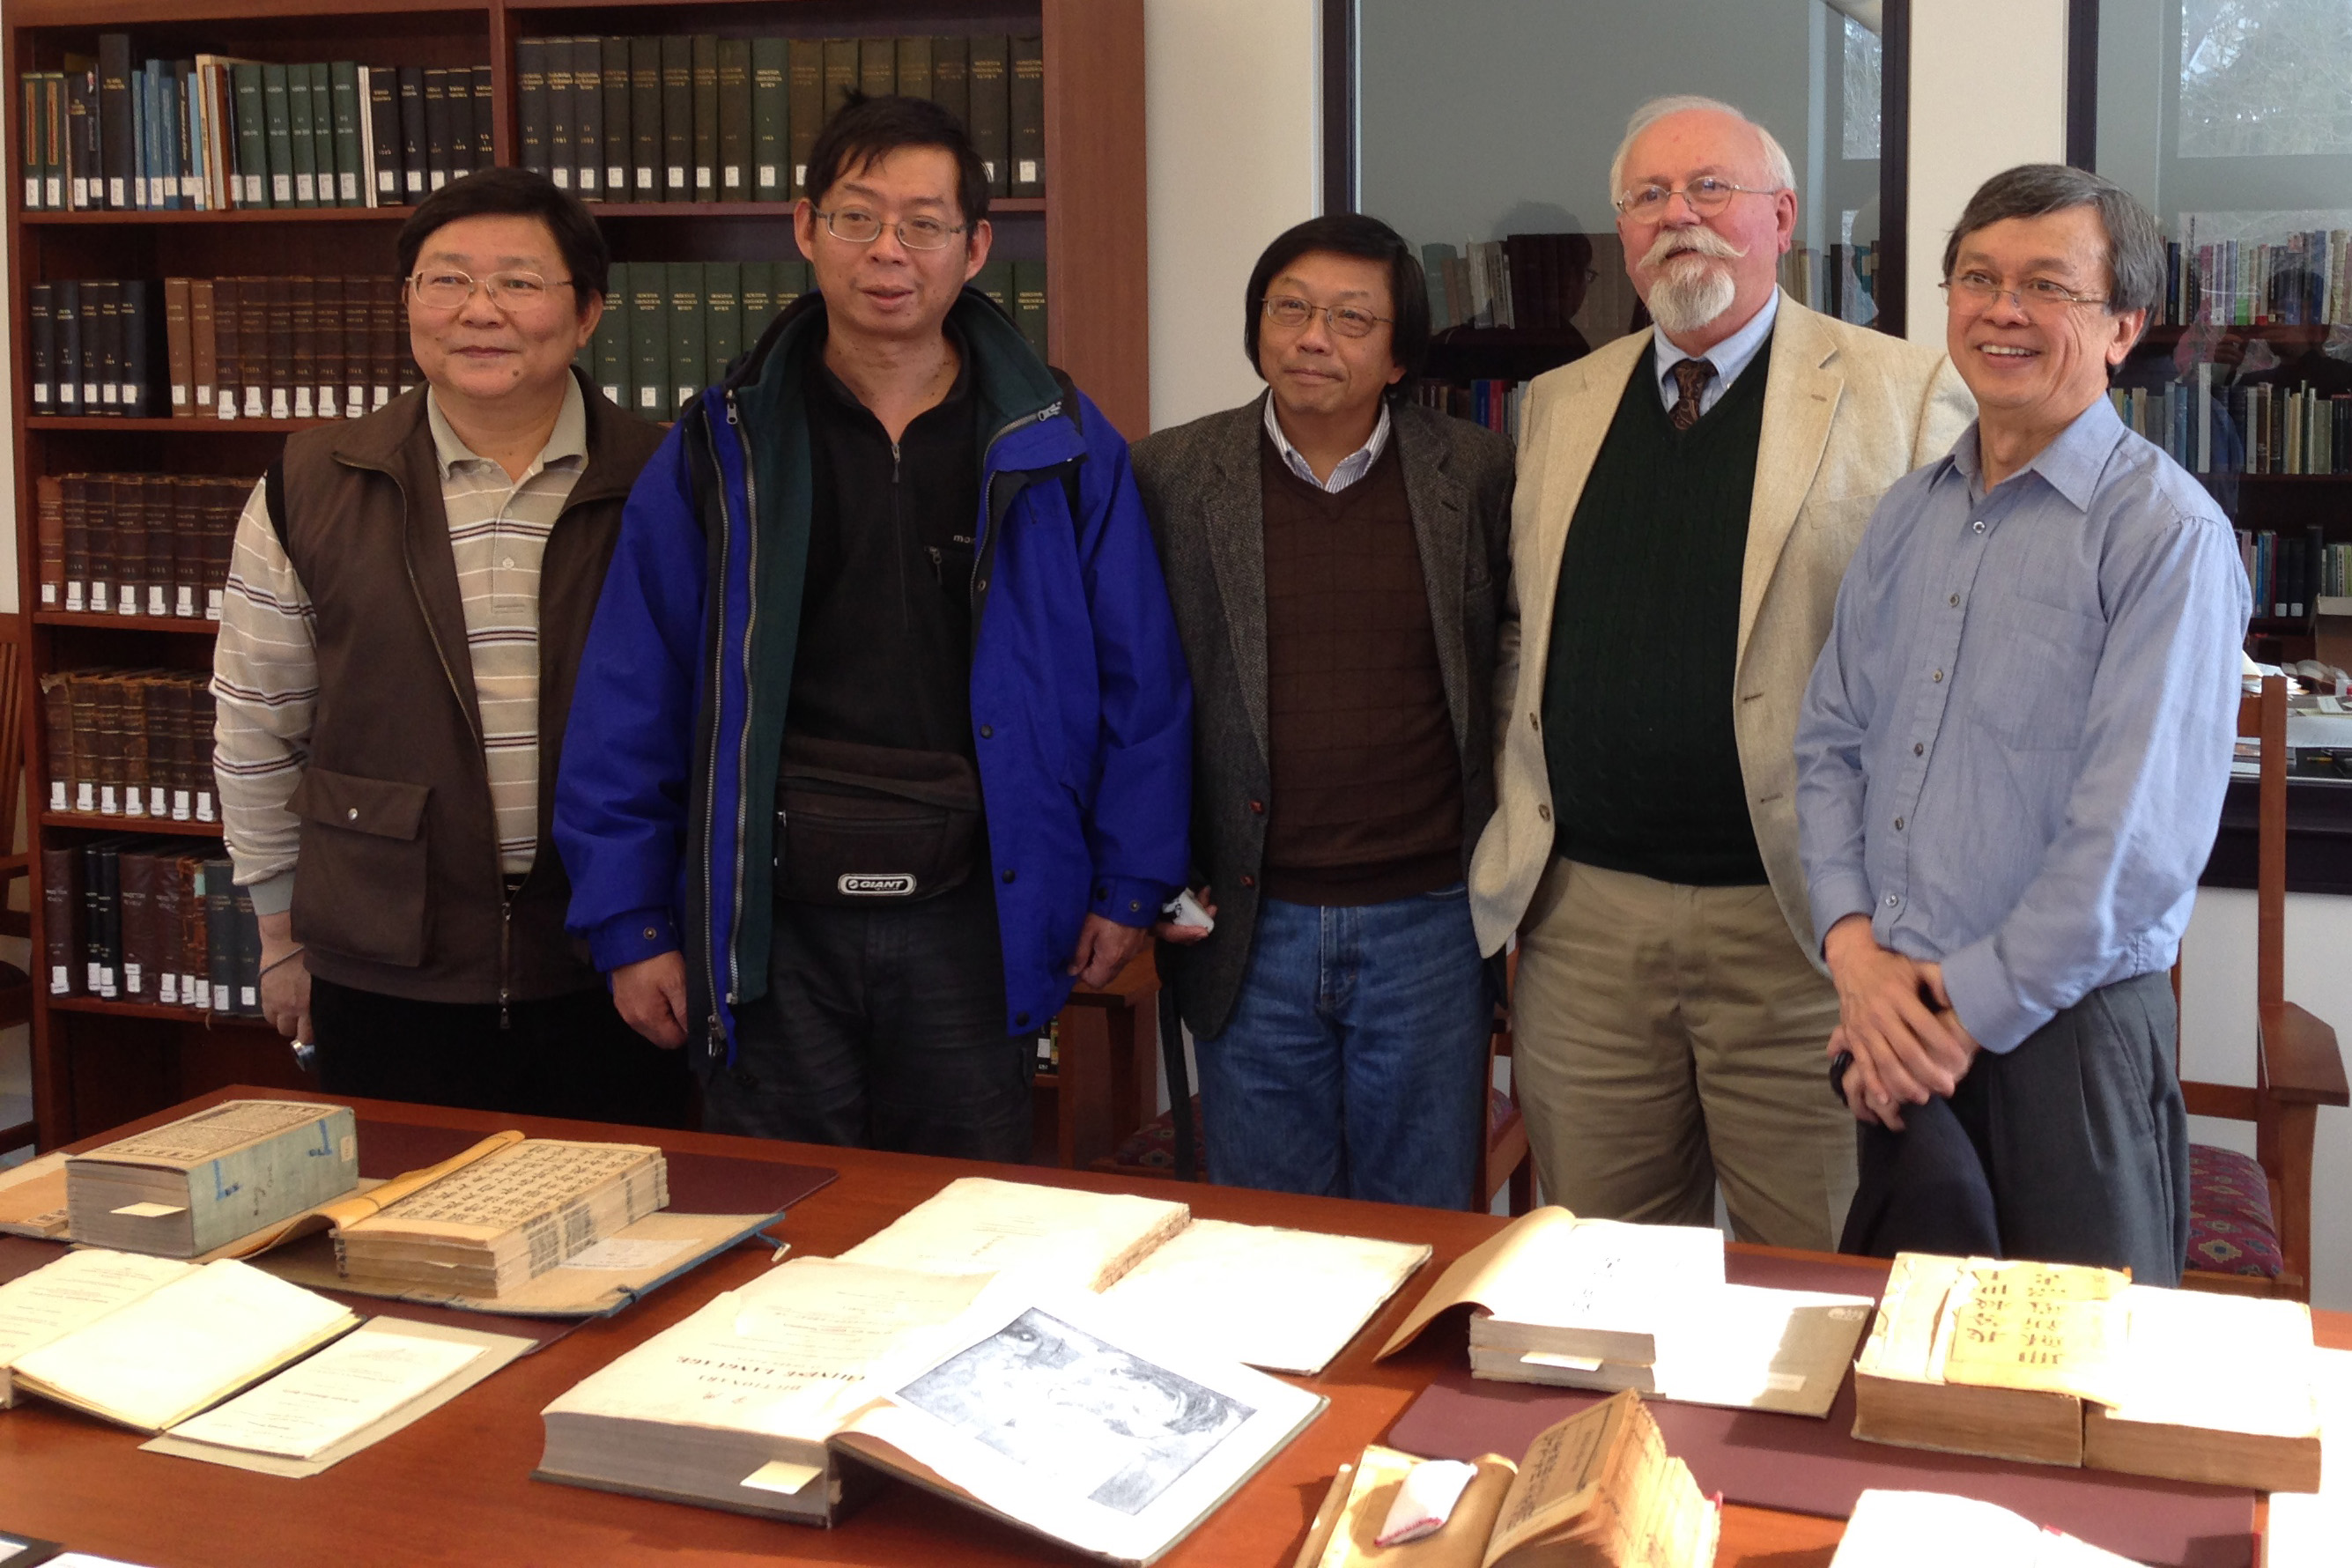 C.L. Seow at PTS Special Collections